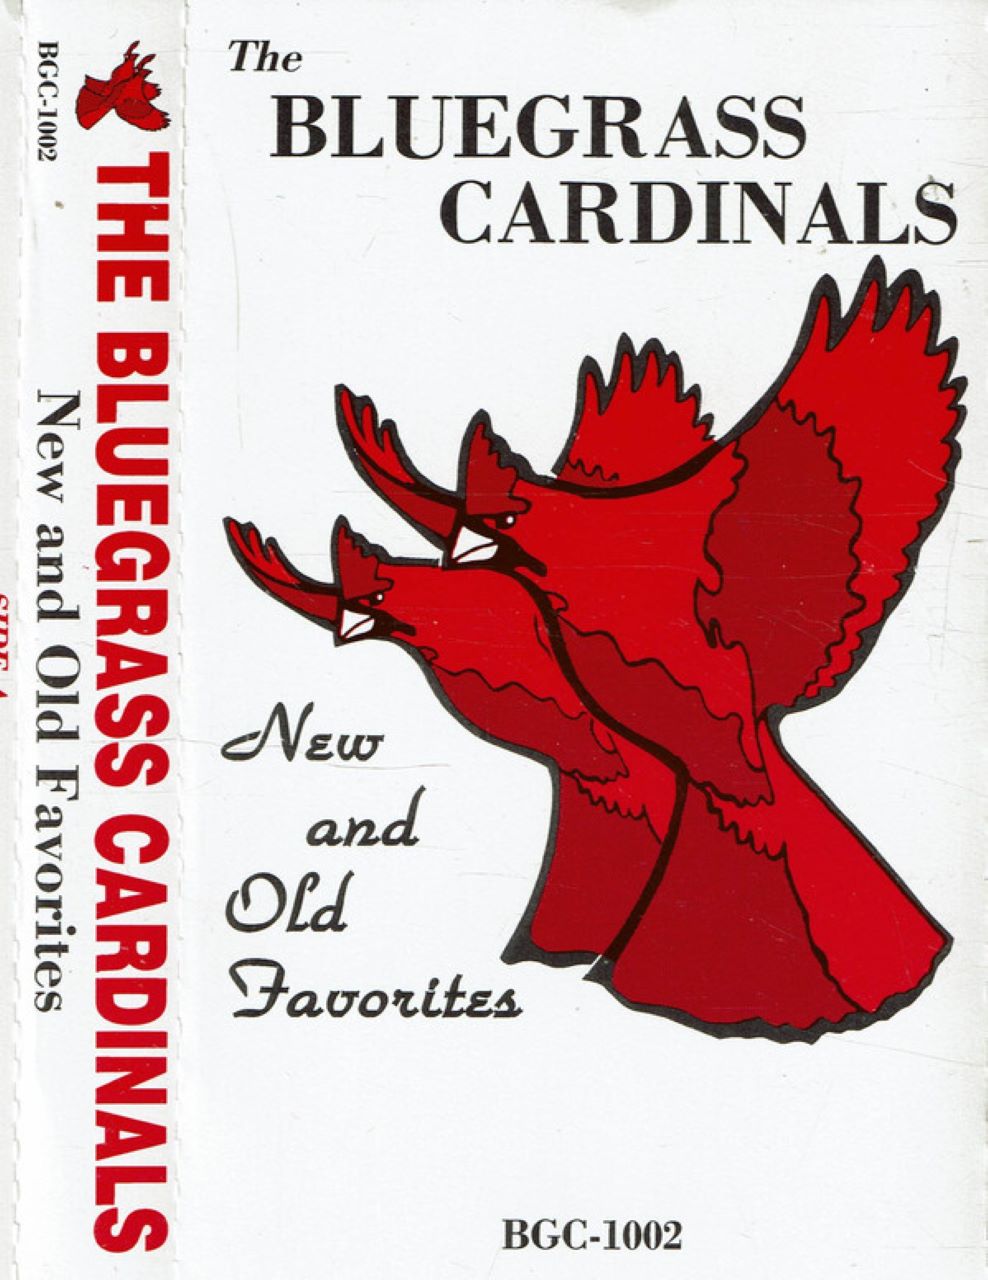 Bluegrass Cardinals - New And Old Favorites cover album